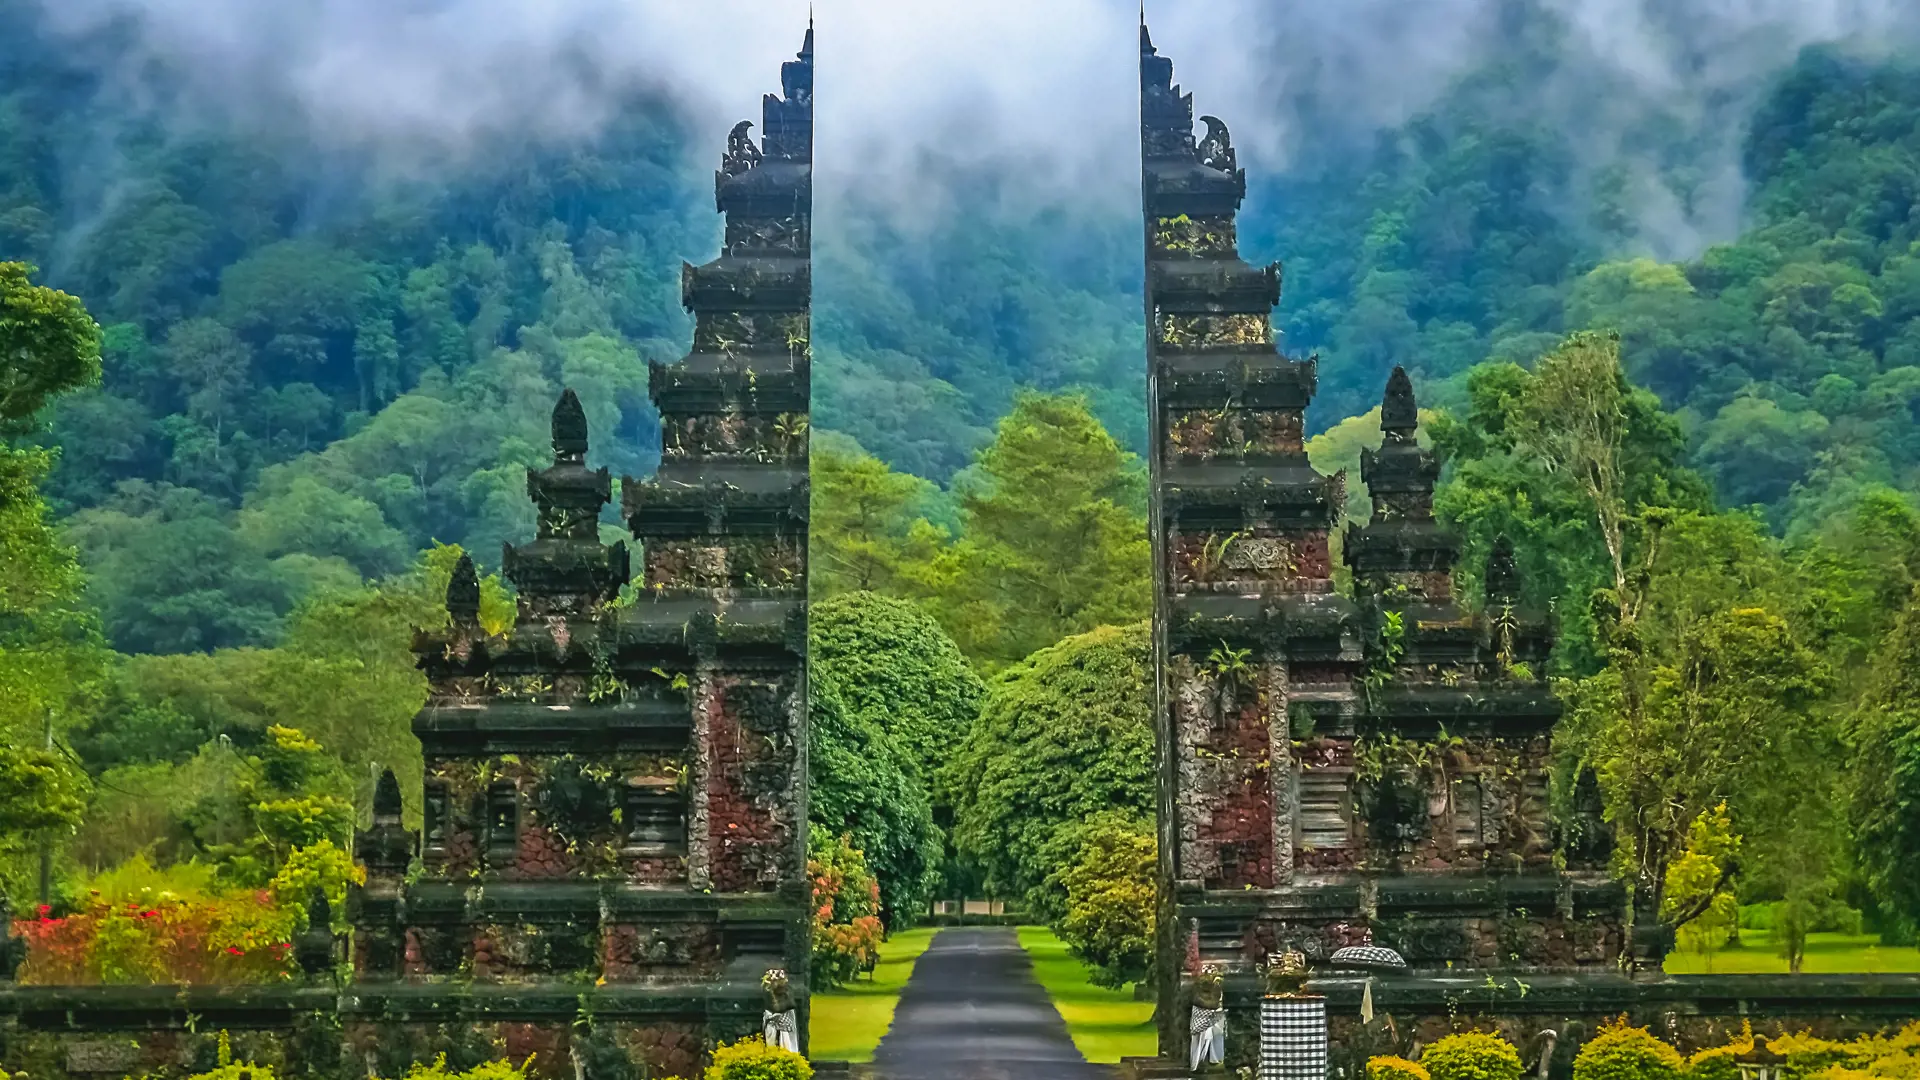 Gates to one of the Hindu temples in Bali in Indonesia.jpg